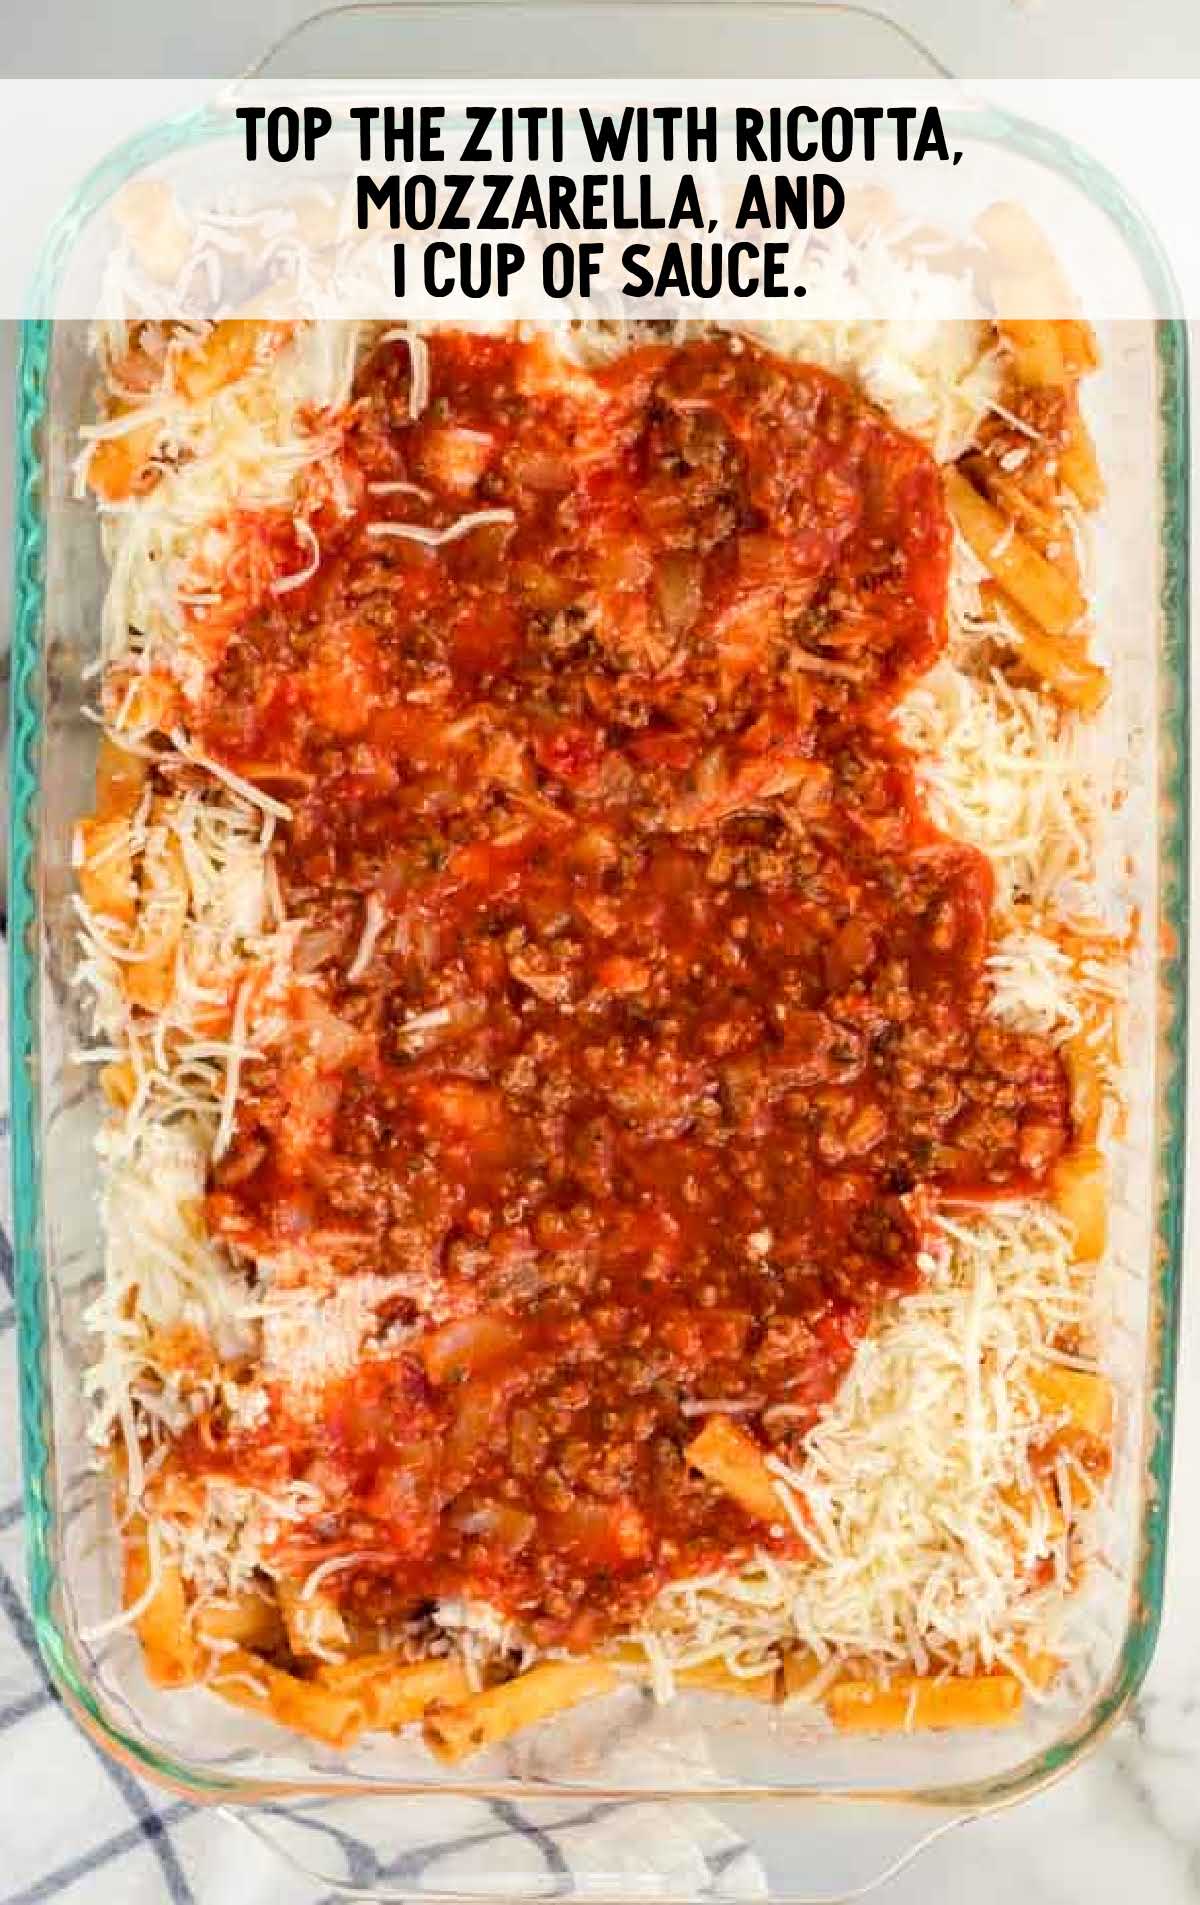 ziti topped with cheeses and sauce in a baking dish